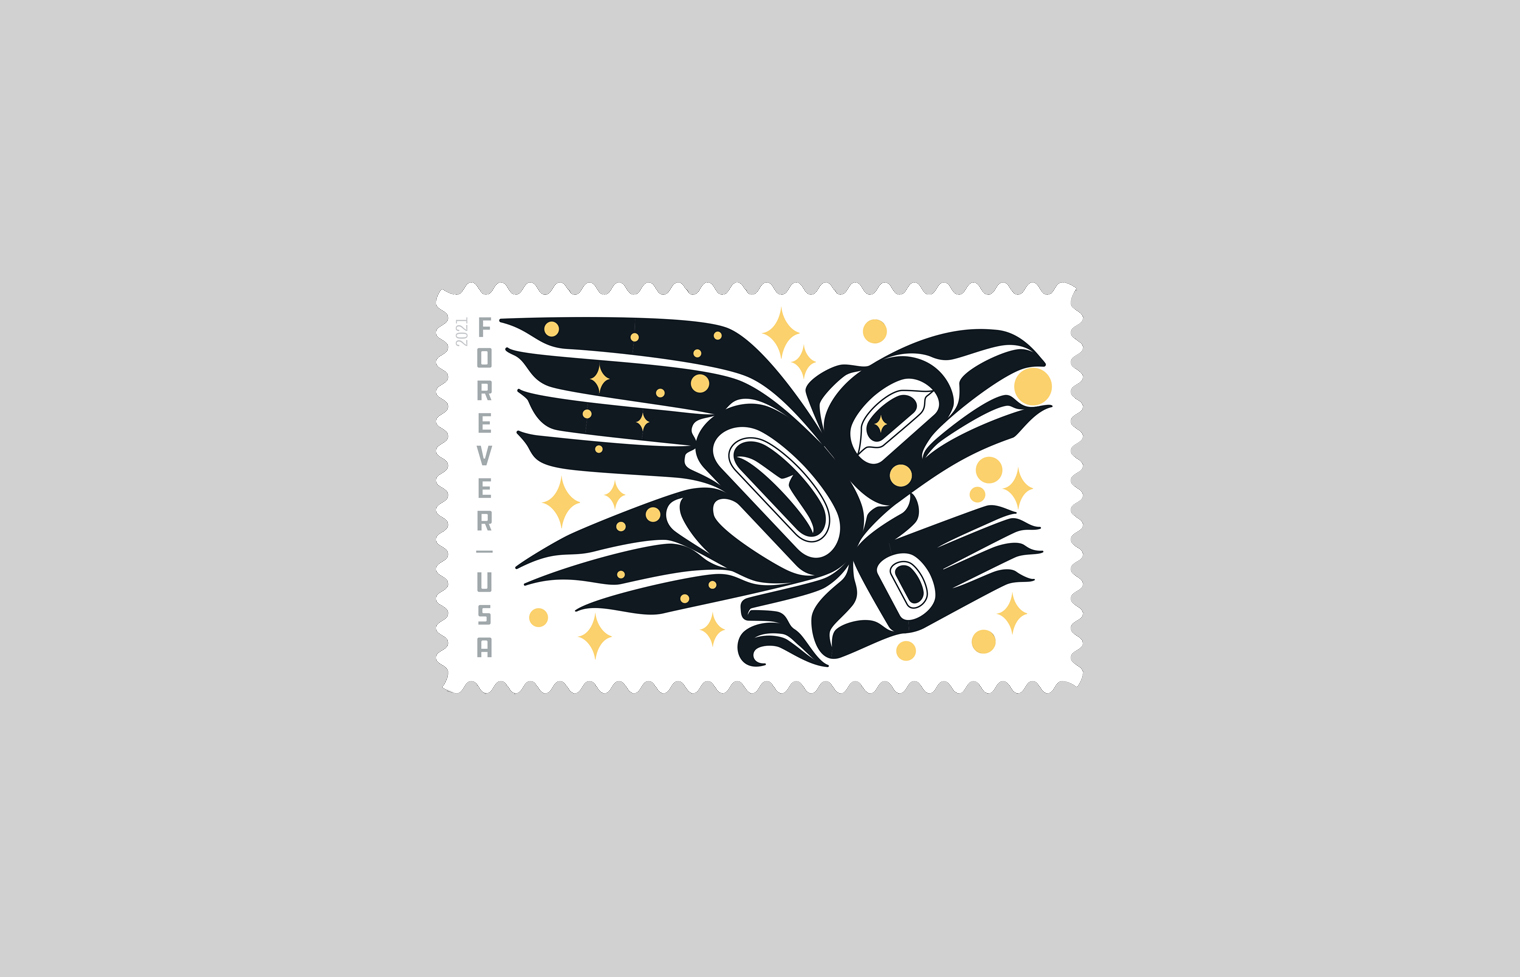 The Raven Story stamp features a raven in a formline art style in black and white by Rico Worl, a Tlingit/Athabascan artist.